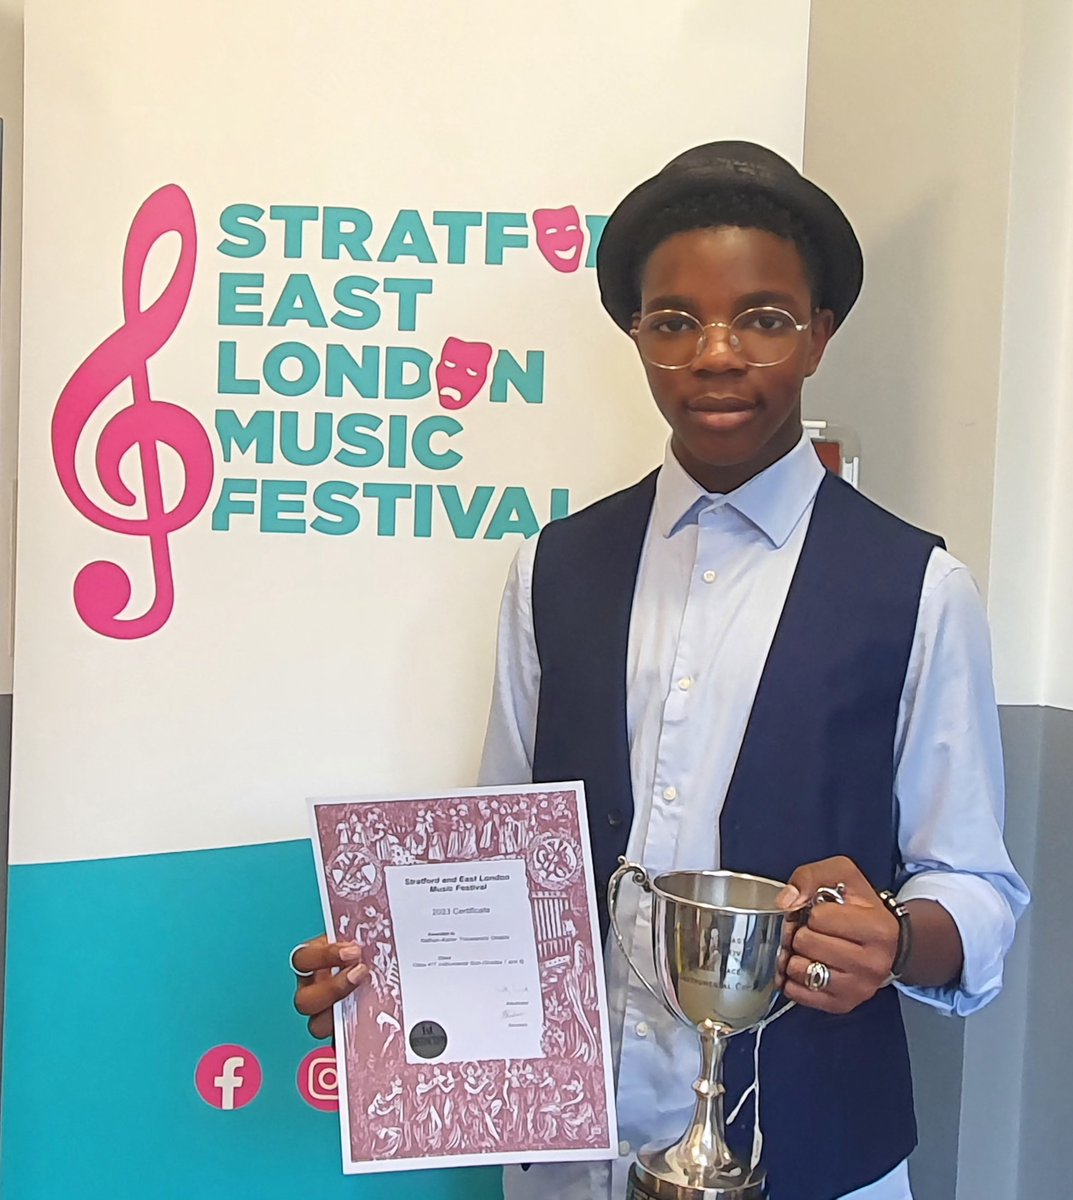 Nathan-Asher took part in Stratford and East London Music Festival over half term
Competing in:

Instrumental Solo (gr7 & 8) - Drum Kit  - 1st Place
Good competion 🎻& flute

@NewhamMusic 
@londonmusicfund 
@music_rugby 
@RugbySchool1567 
@Kilbracken1841 
@PercWorks
@N8than_Asher